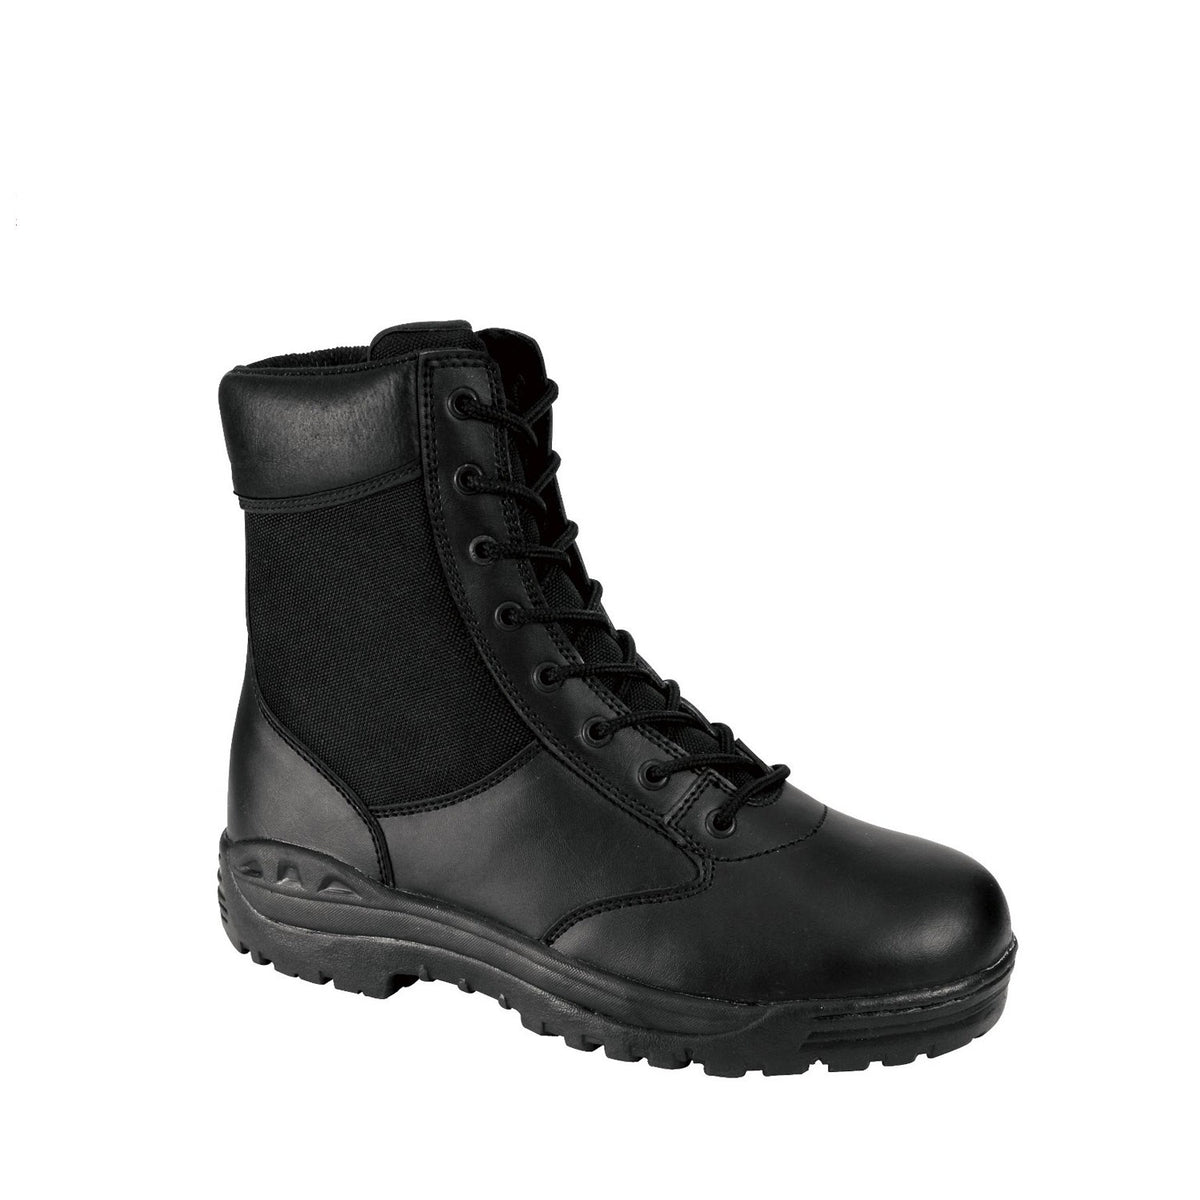 Rothco Forced Entry Security Boots - 8 Inch